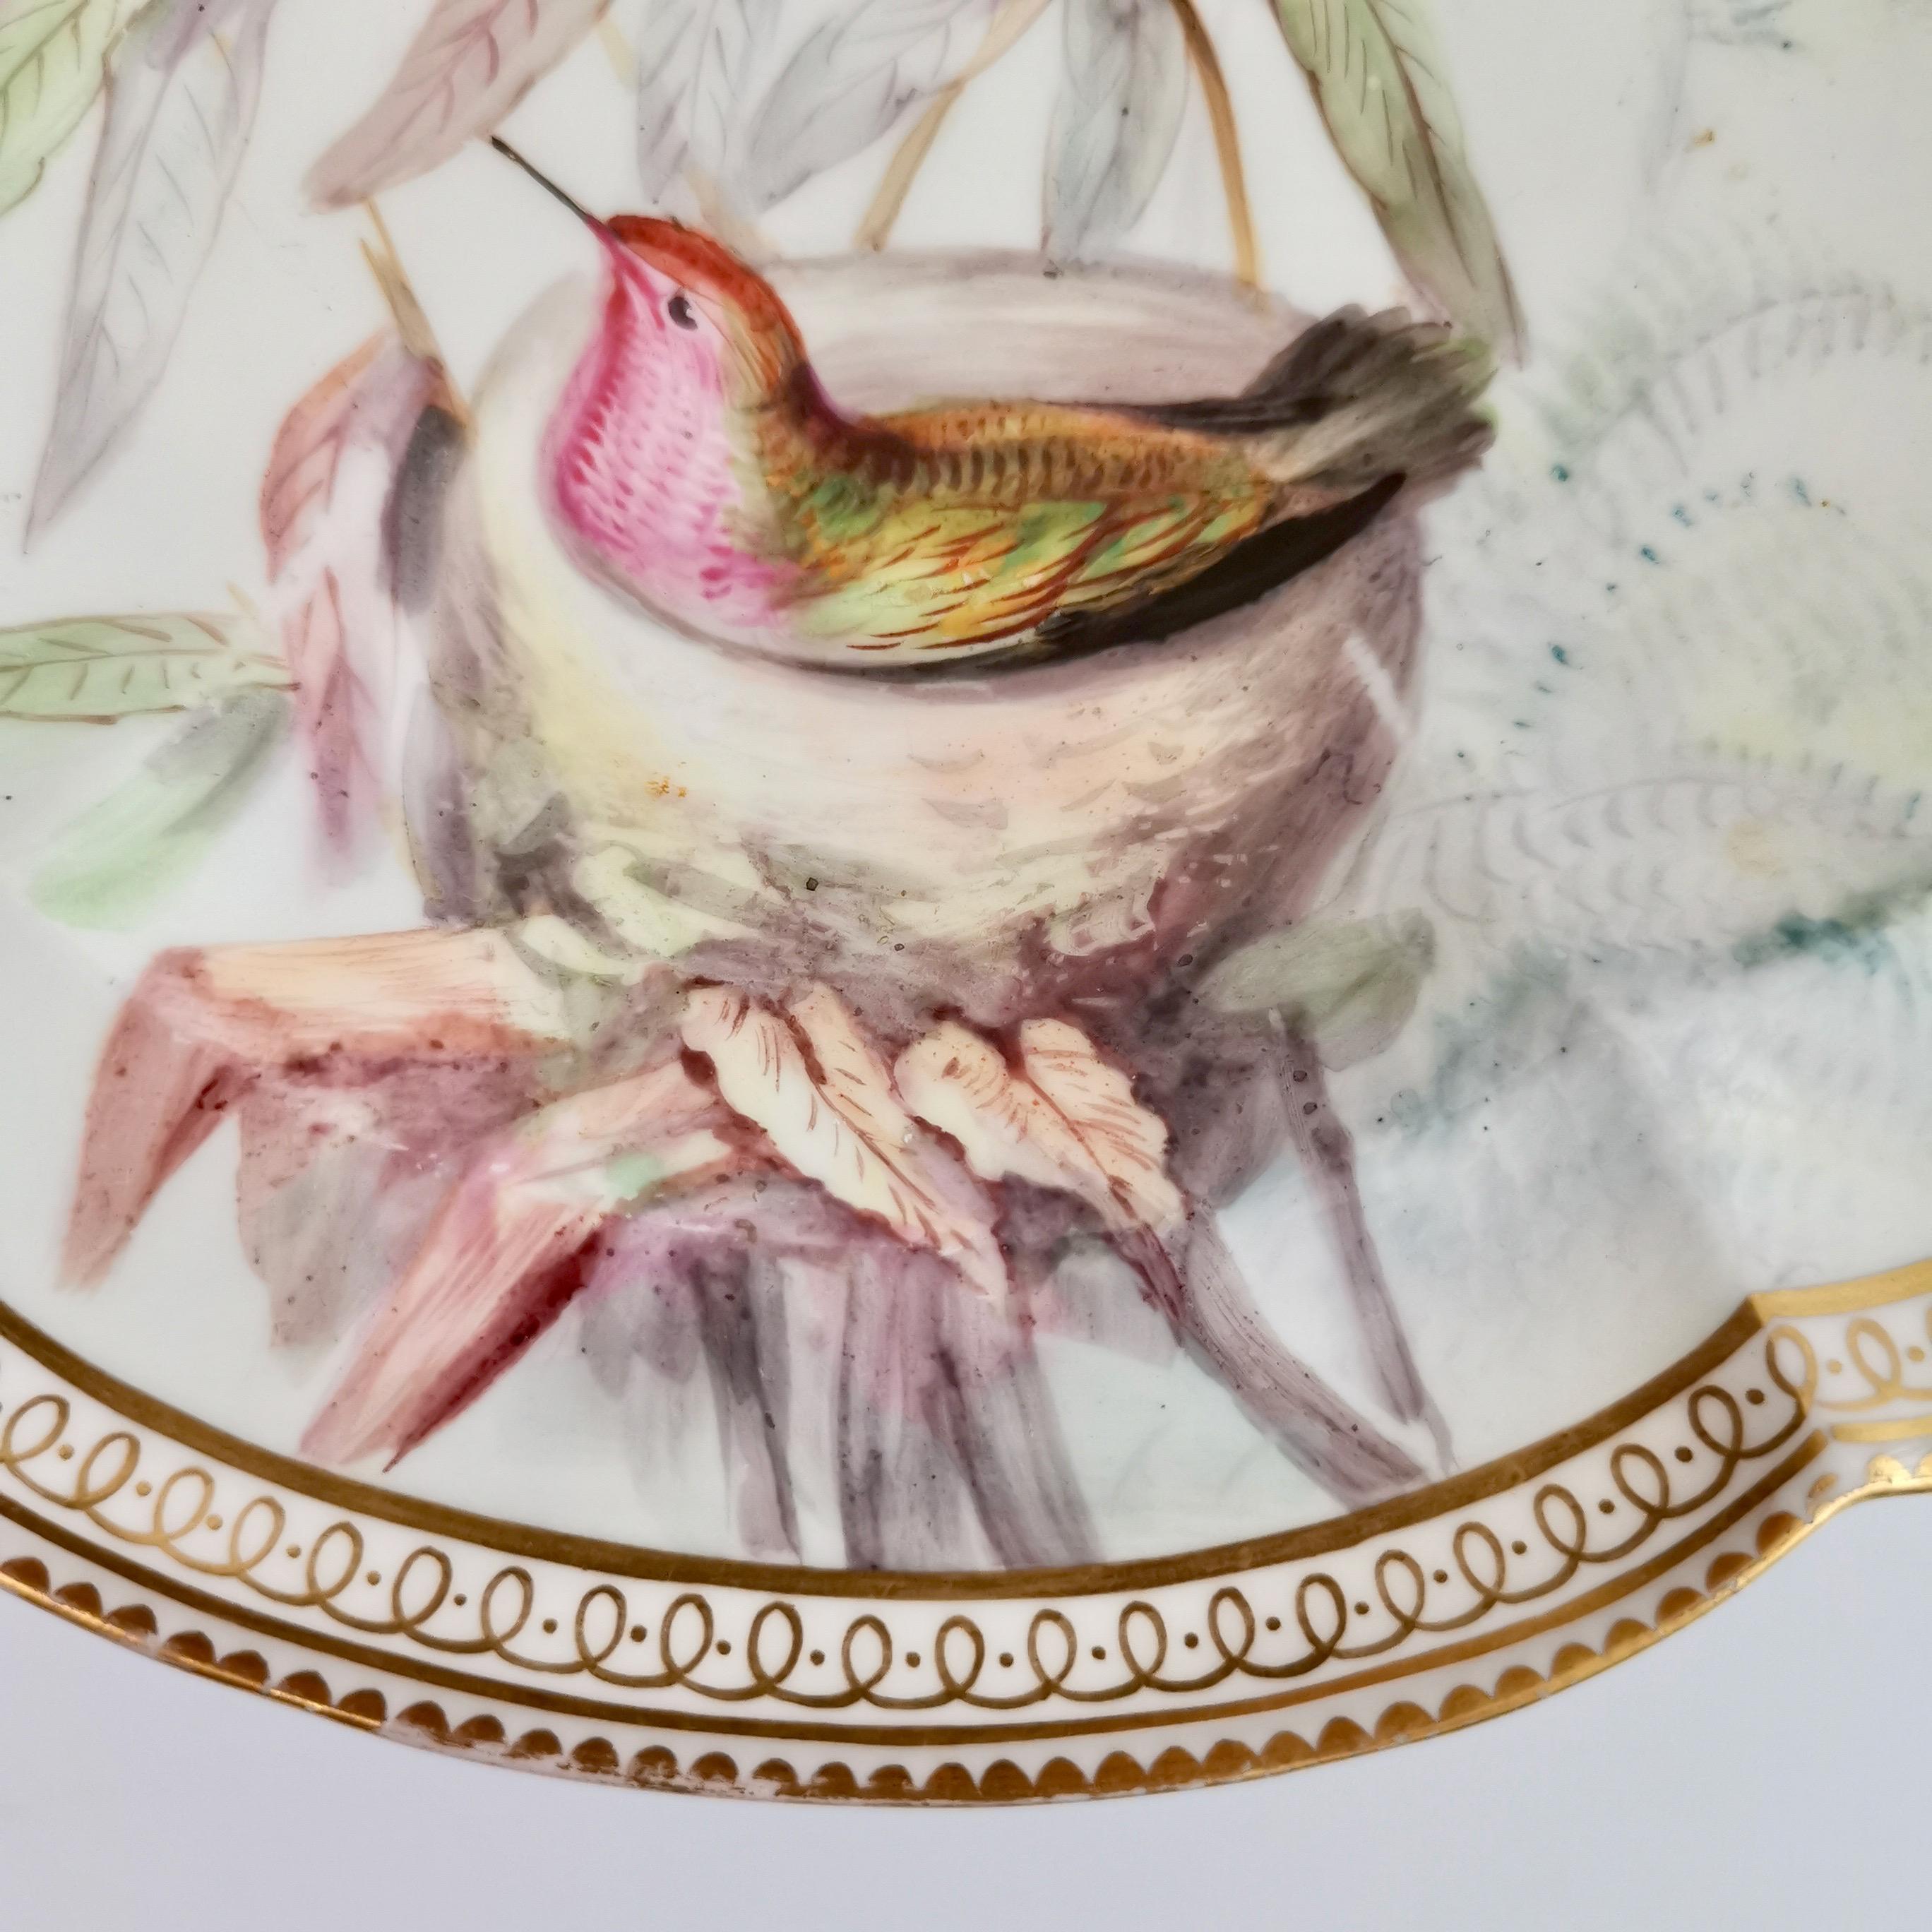 Mid-19th Century Coalport Porcelain Comport and Plate, Birds by John Randall, Victorian 1865-1870